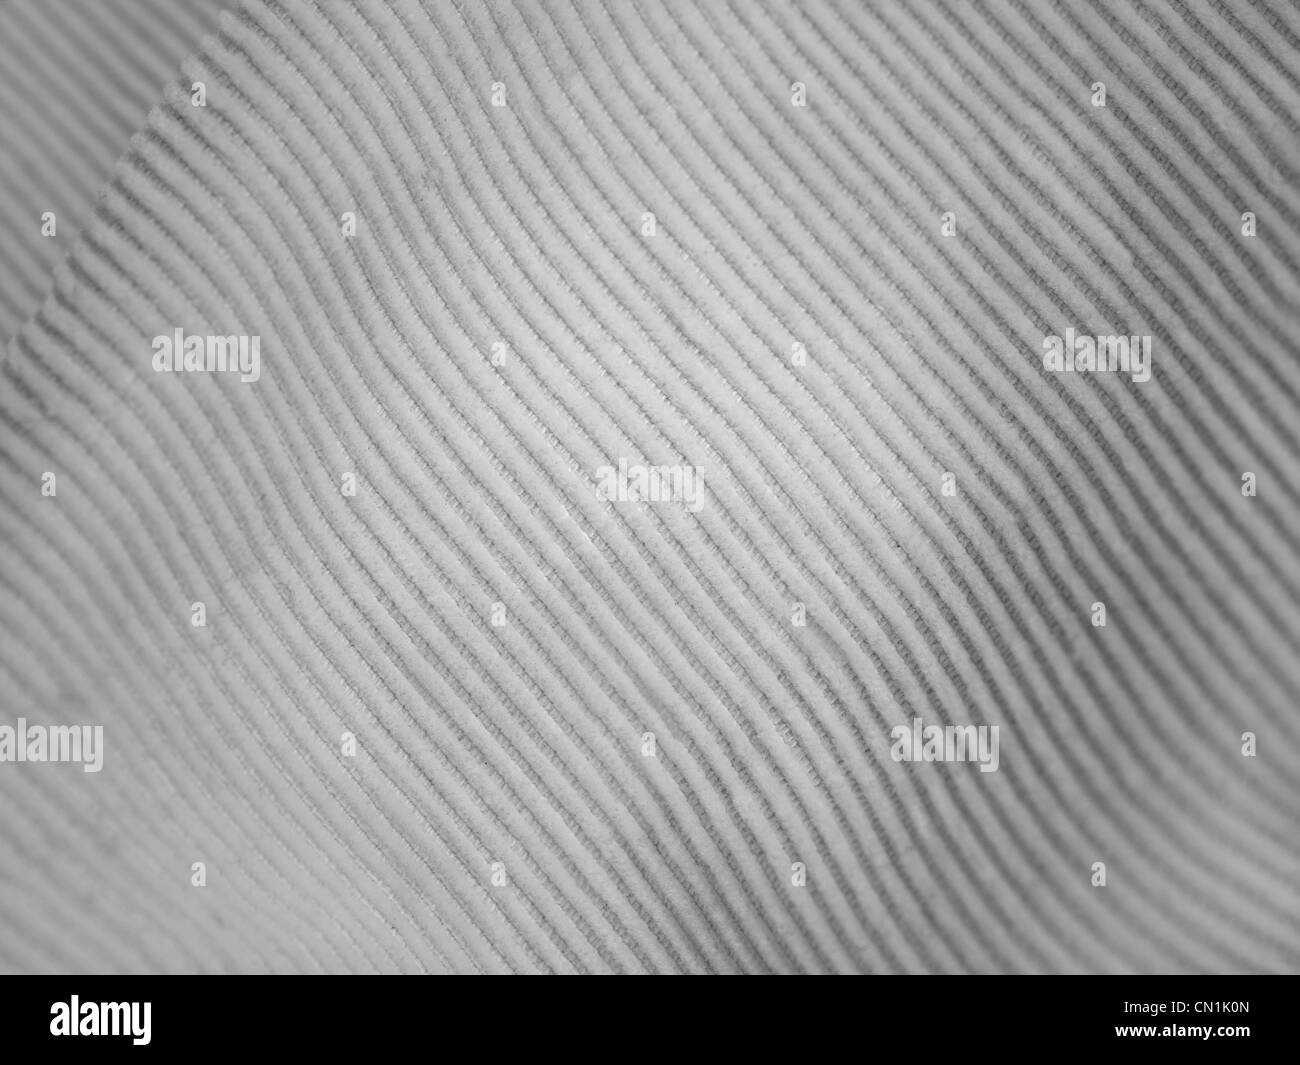 A close up shot of corduroy material Stock Photo